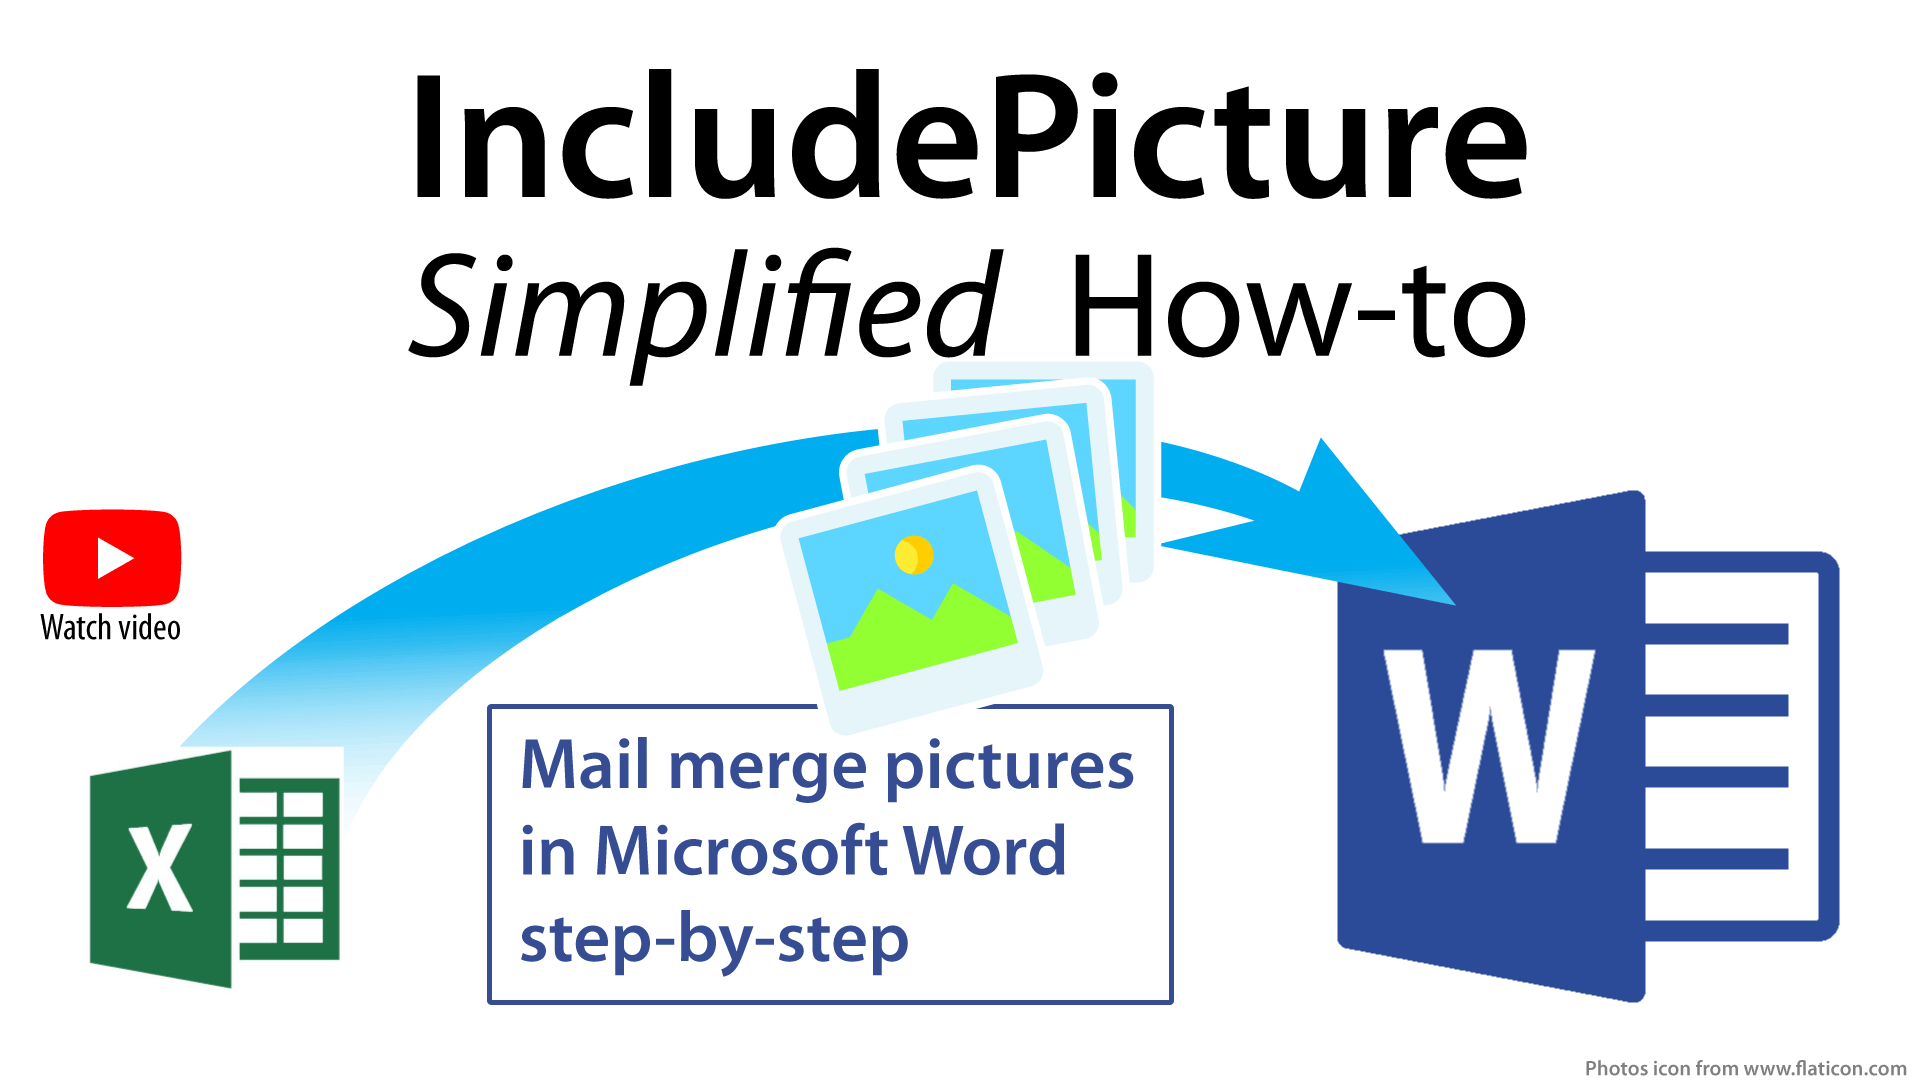 INCLUDEPICTURE Simplified: Mail Merge Pictures in Word for Microsoft Word  365, MS Word 2016, Word 2013, Office 365, Excel